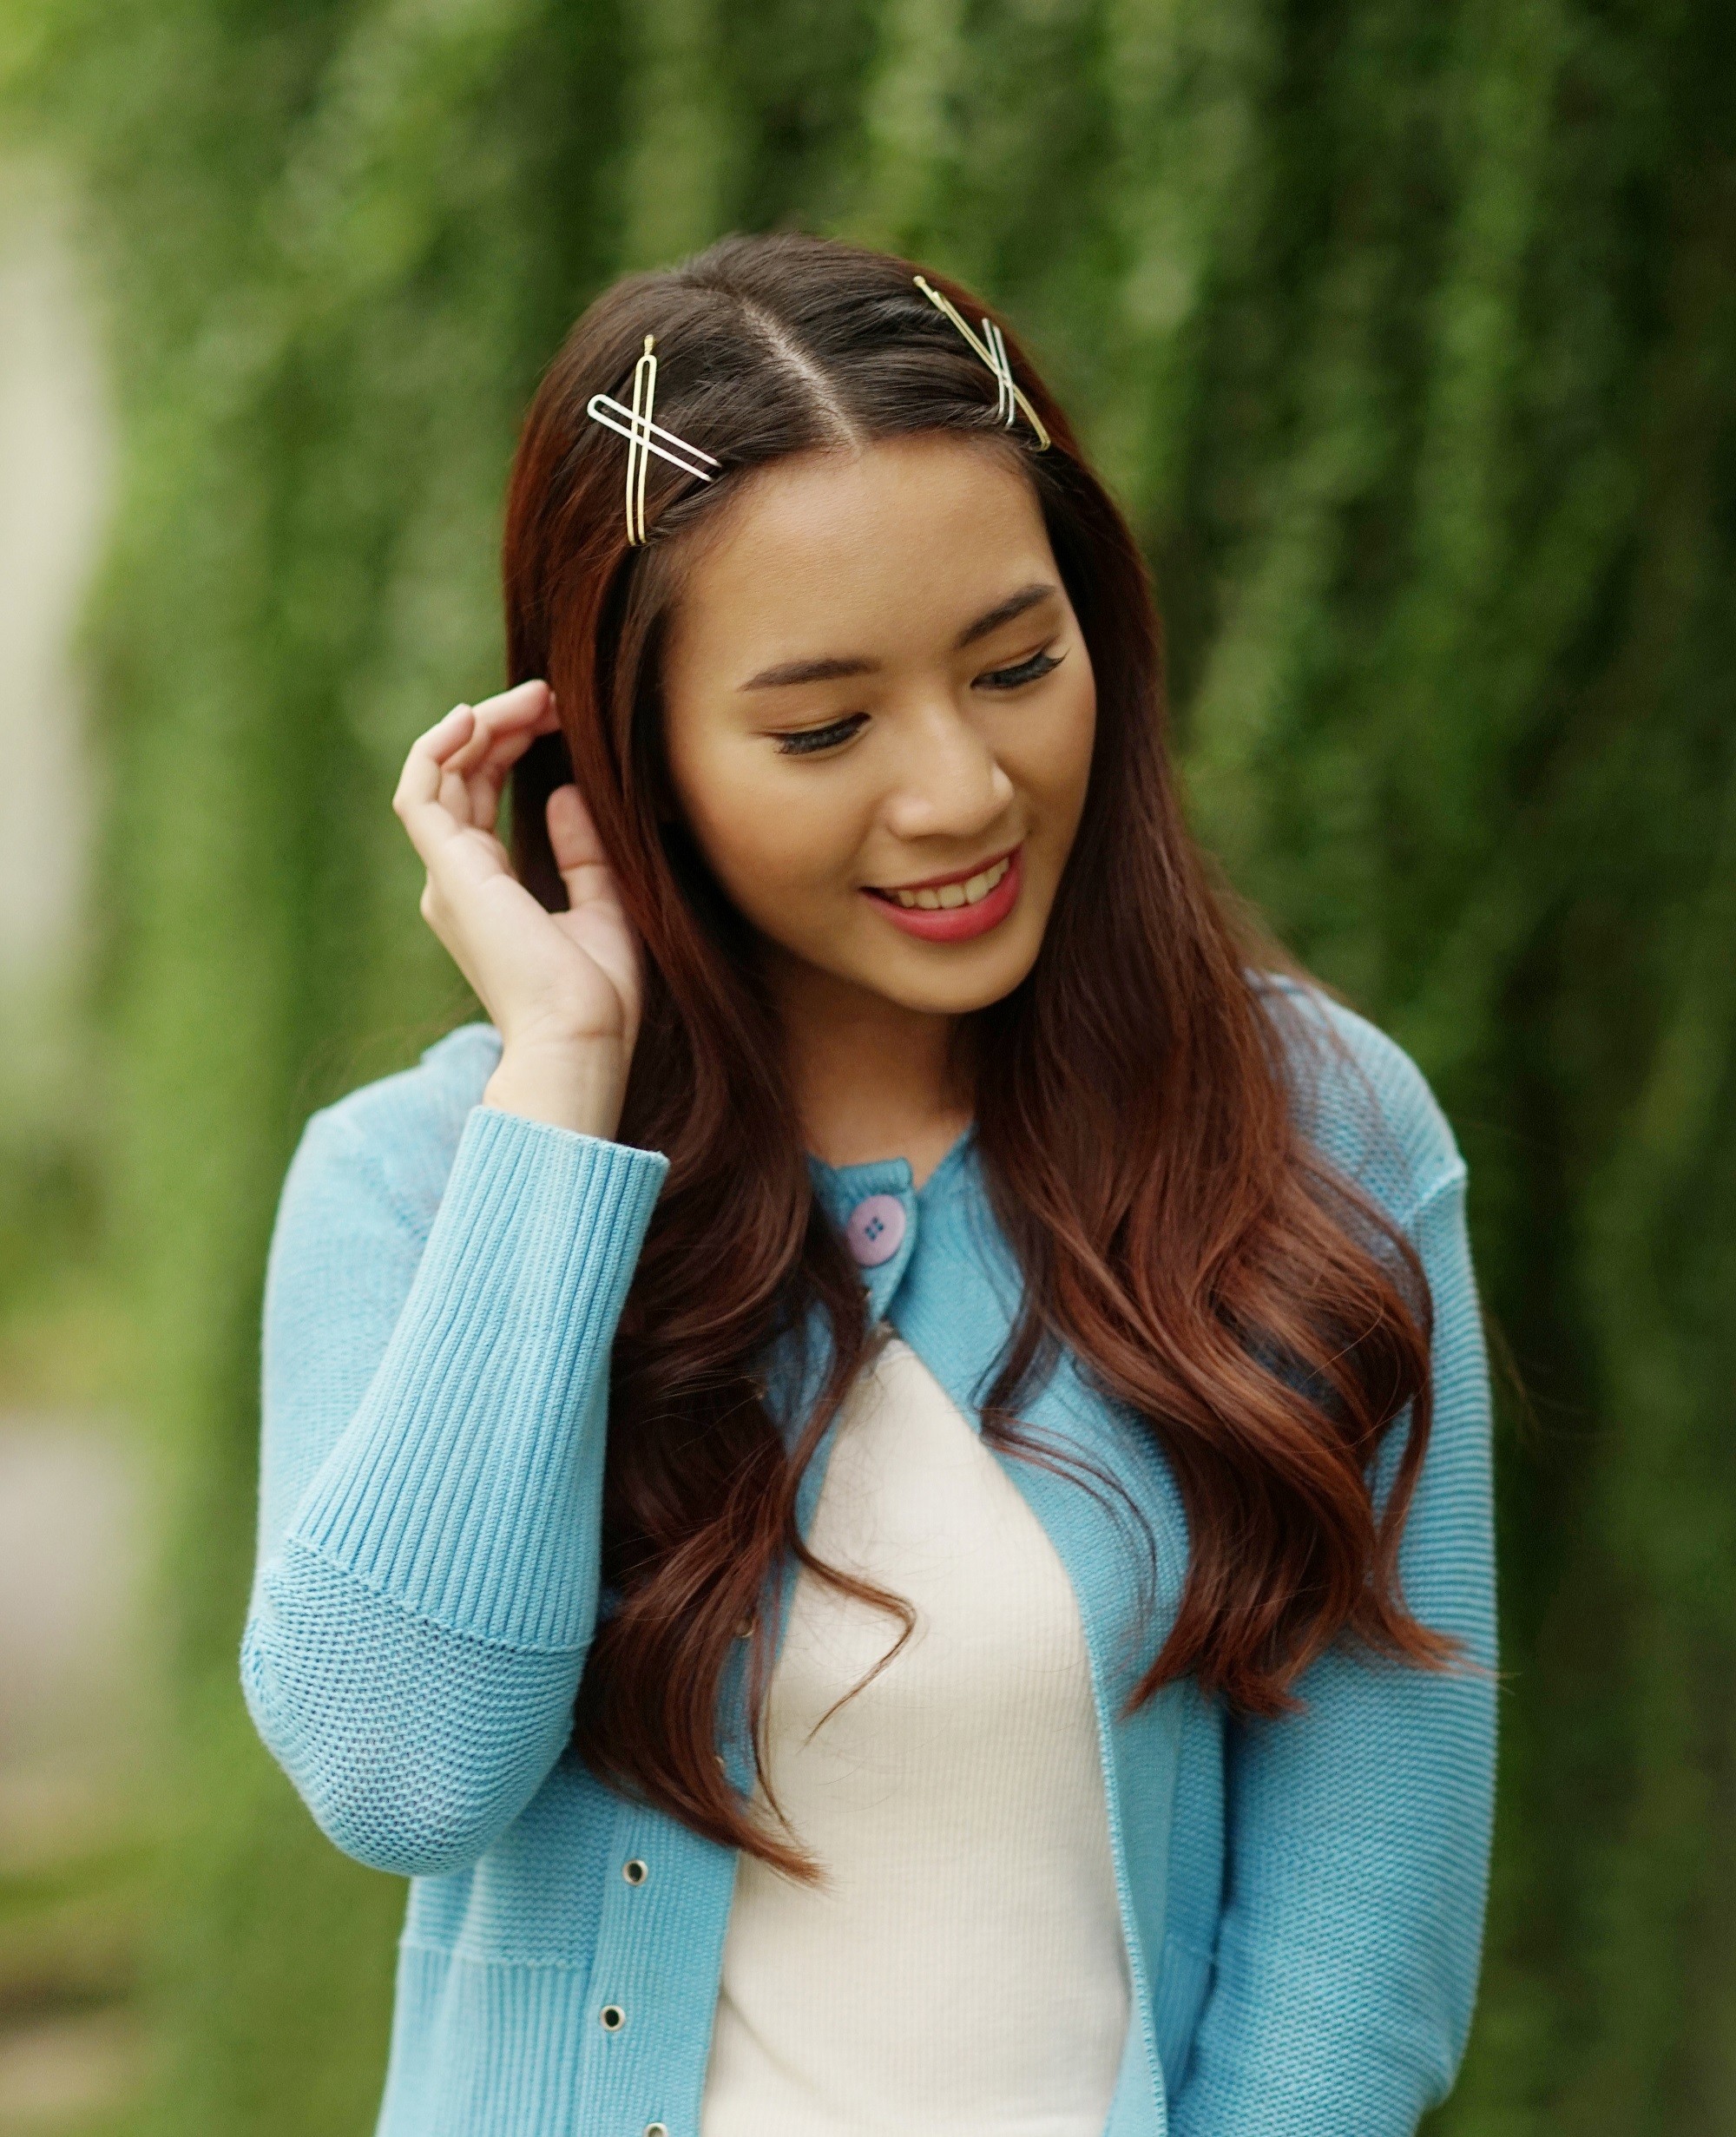 Asian woman with long dark brown ha wearing a blue cardigan outdoors